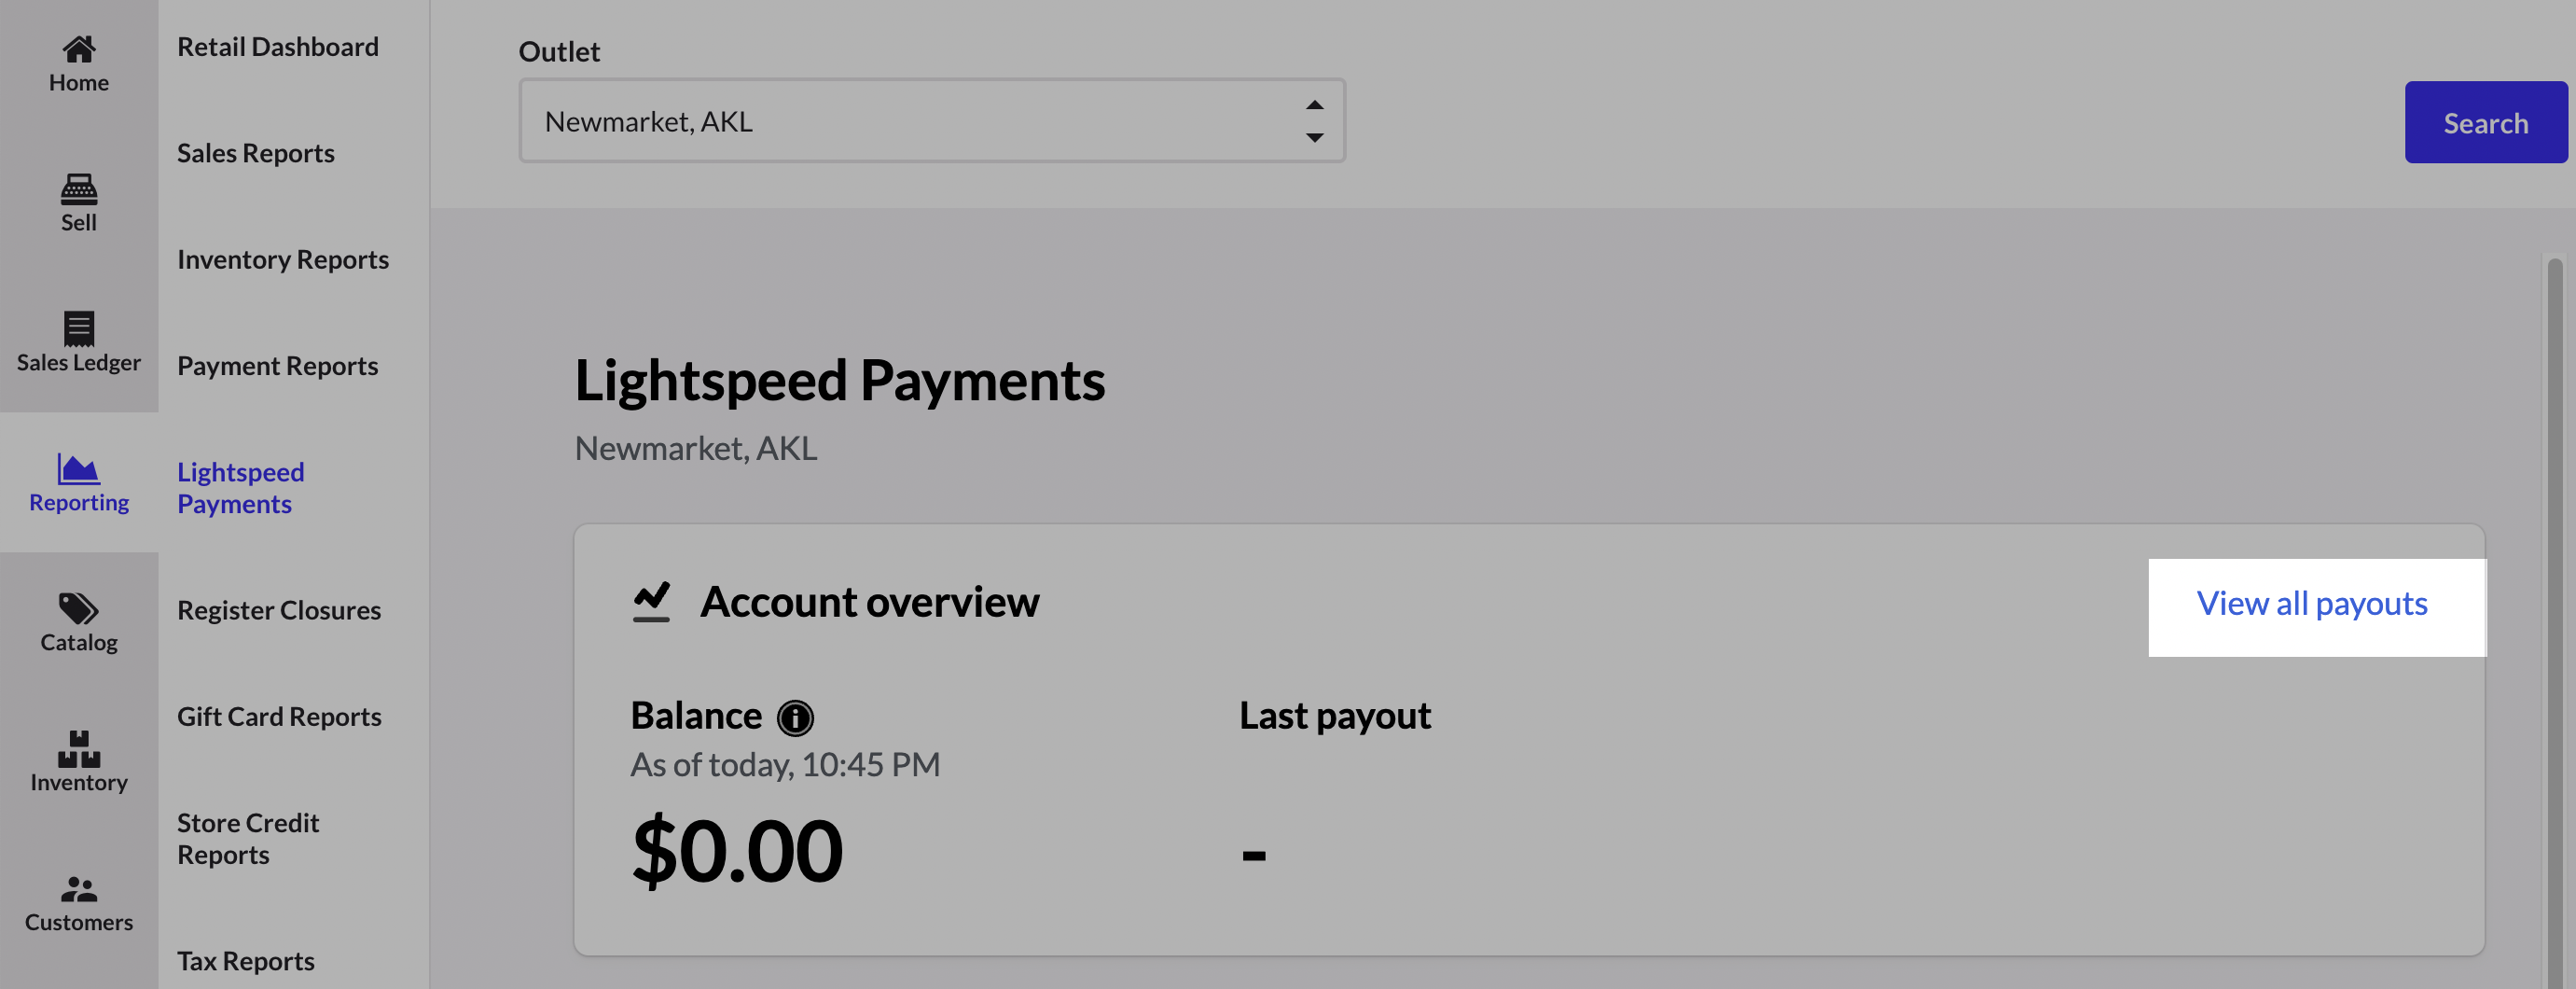 lightspeed_payments_report.png